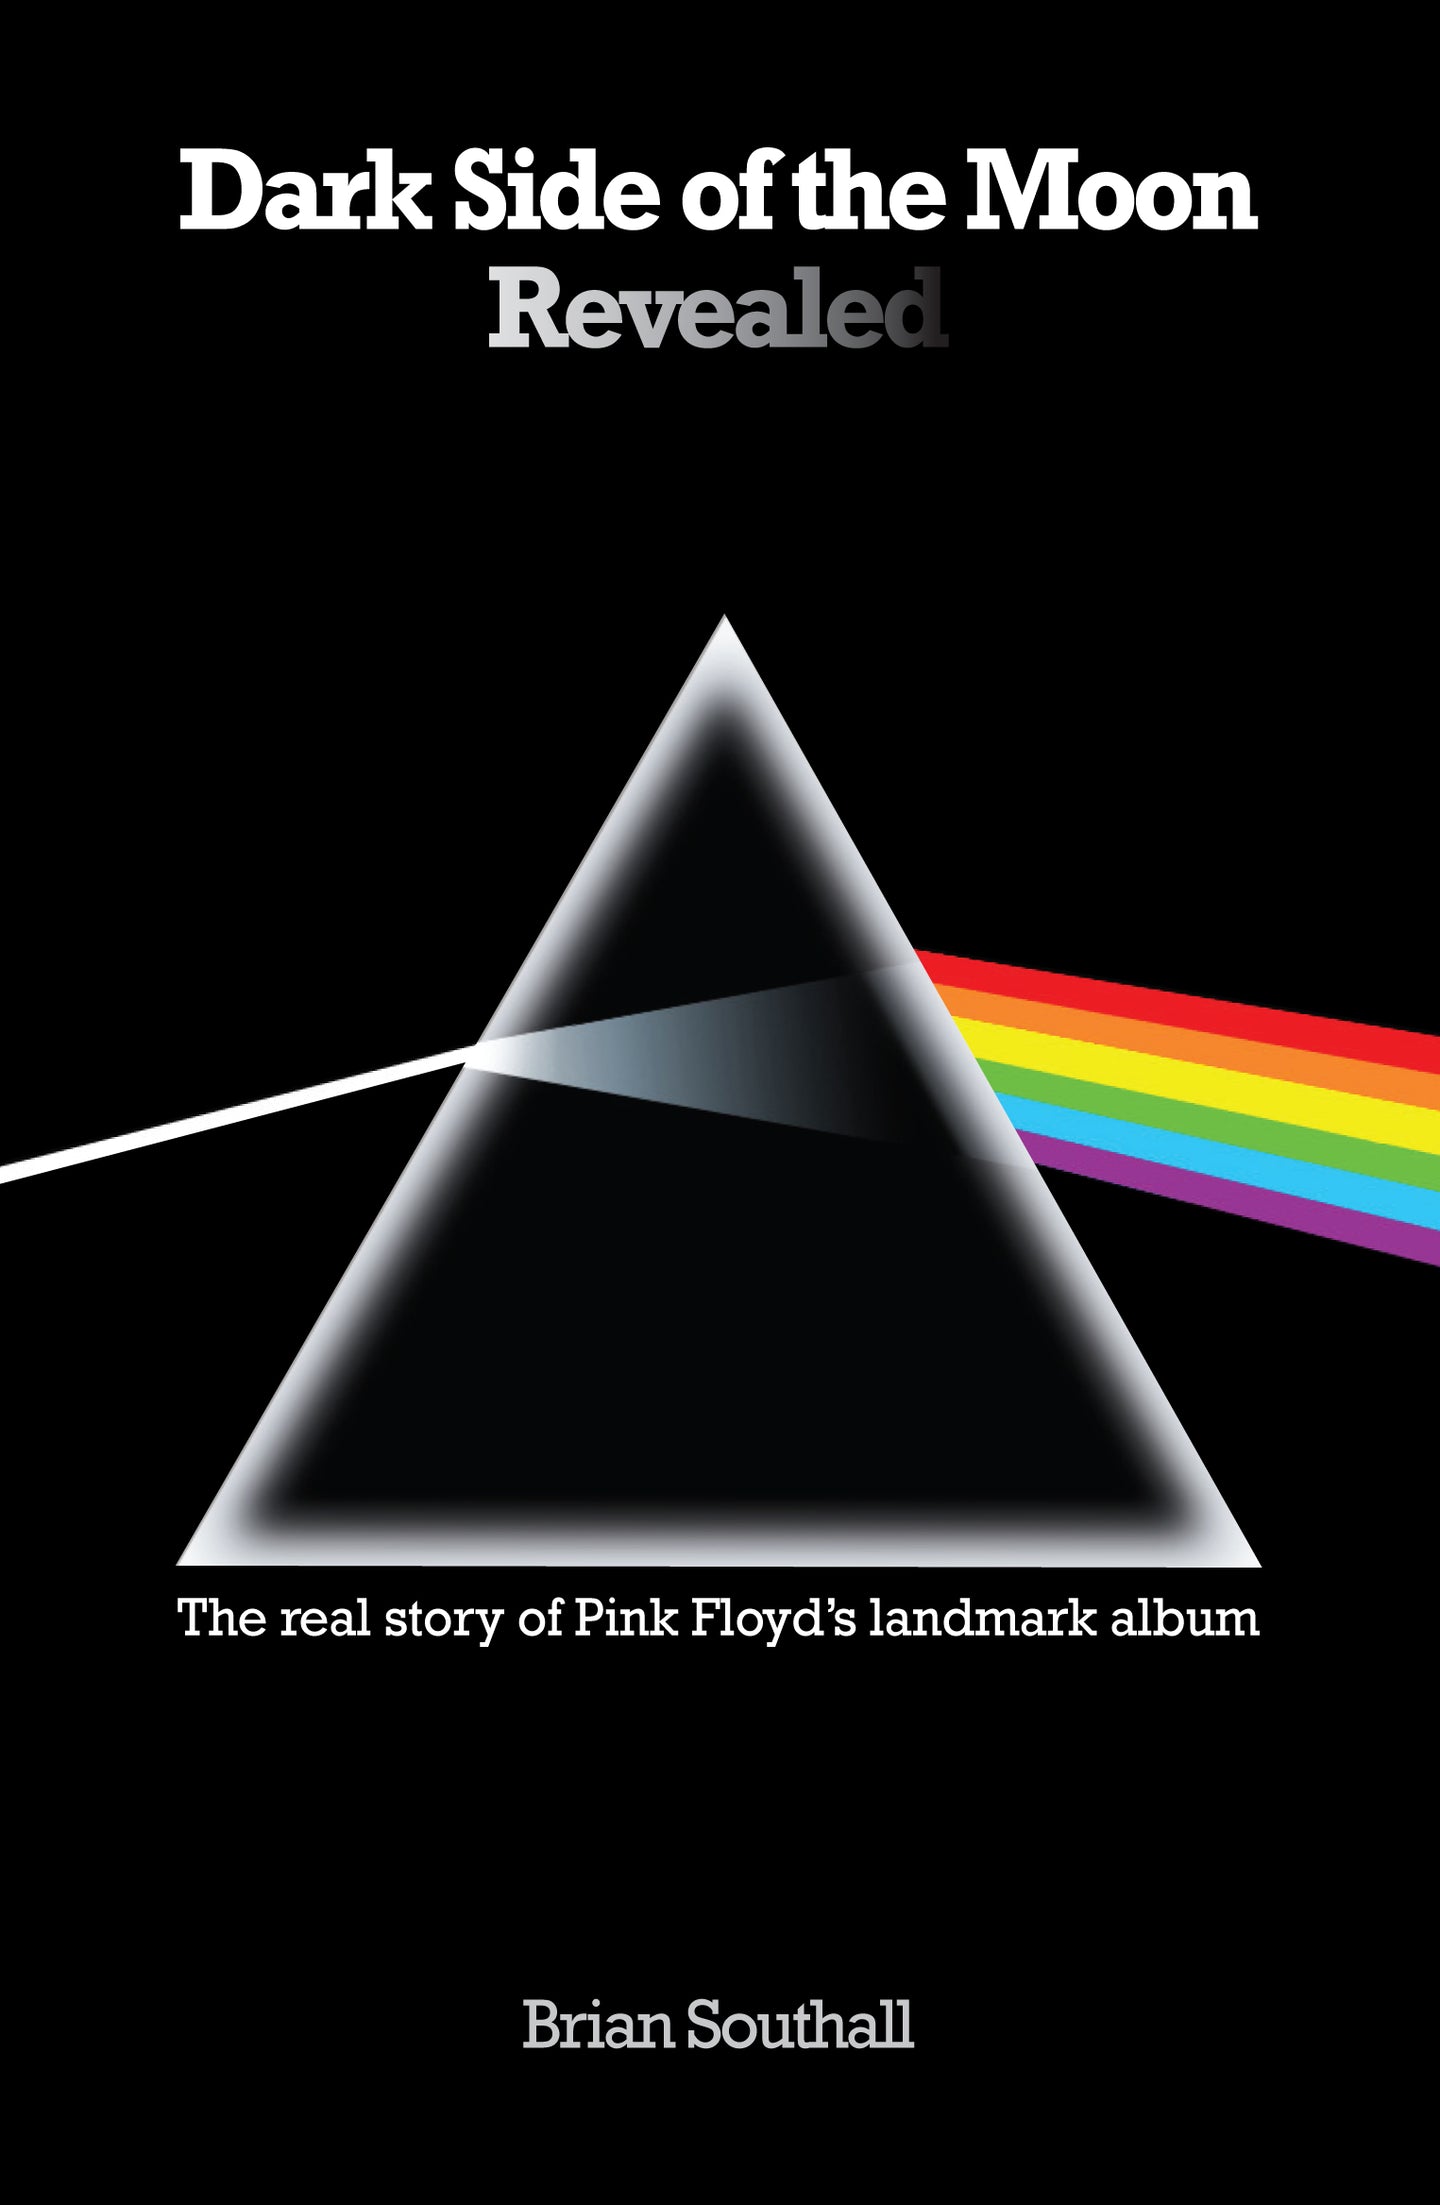 Dark Side of The Moon Revealed